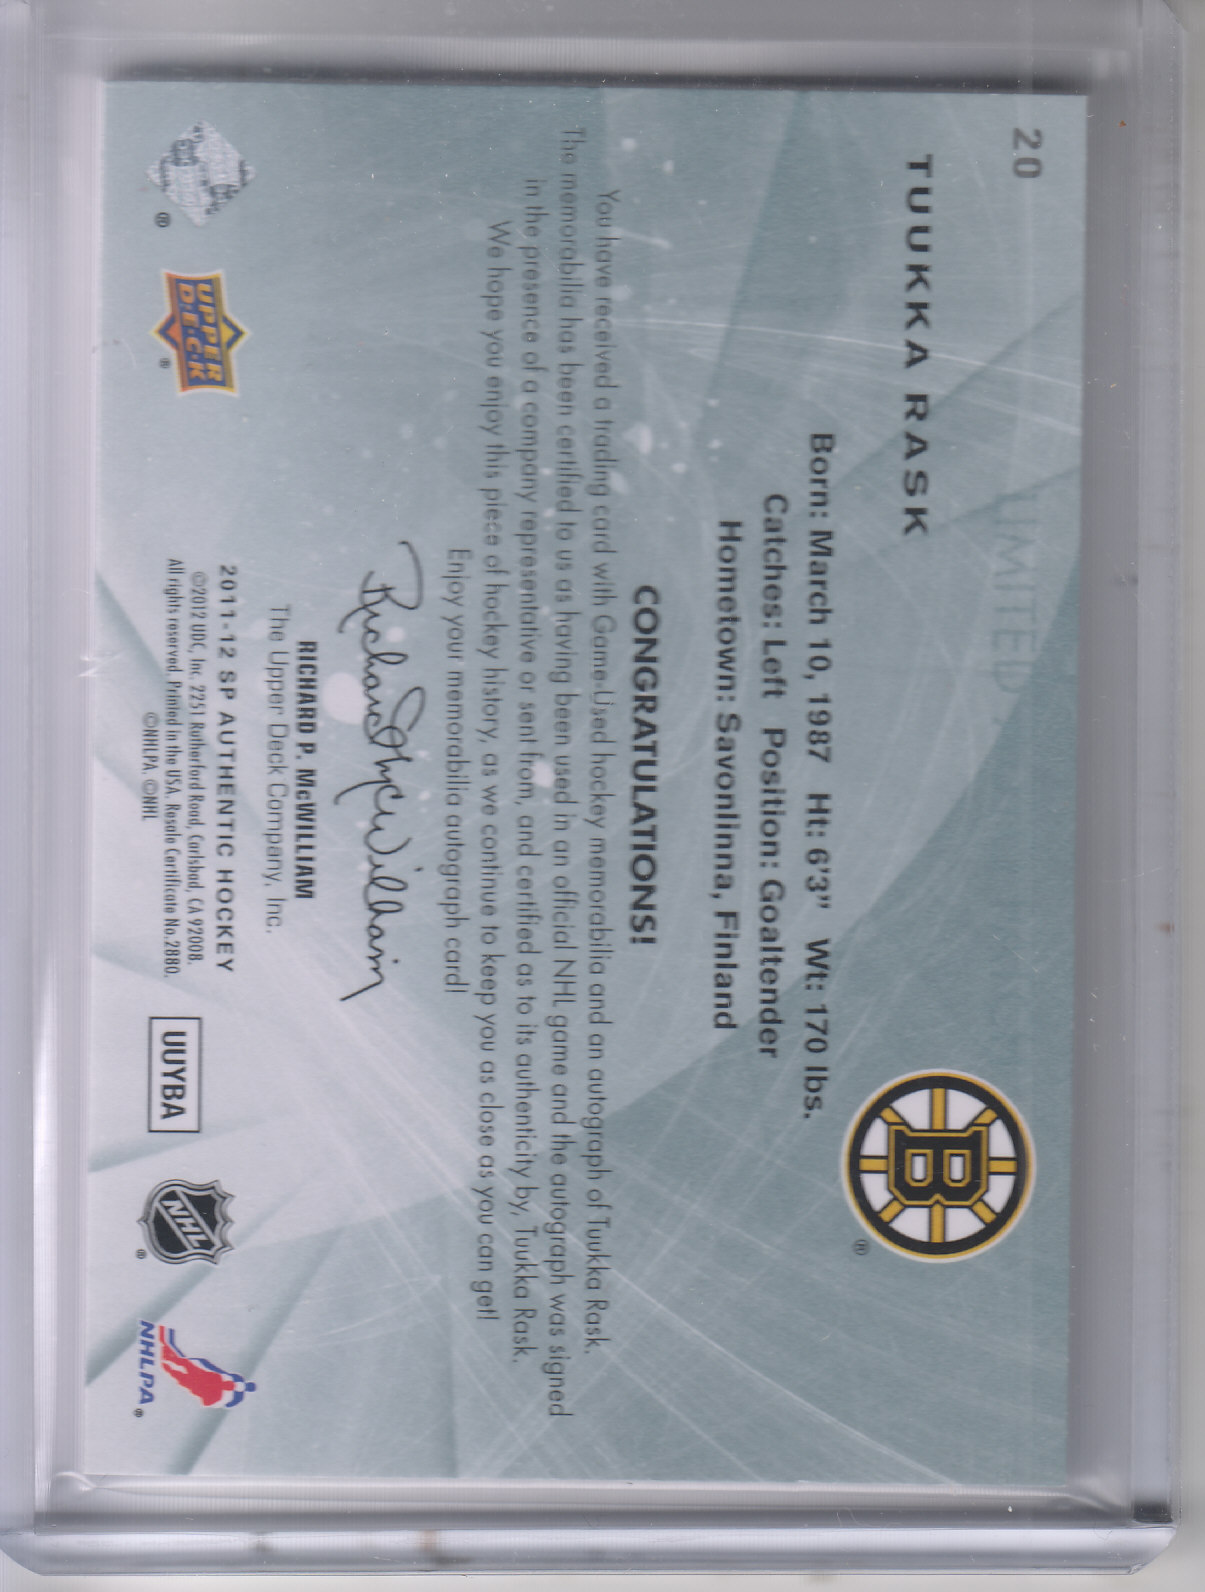 2011-12 SP Authentic Limited Patches #20 Tuukka Rask AU/25/(inserted in 2012-13 SP Authentic) back image